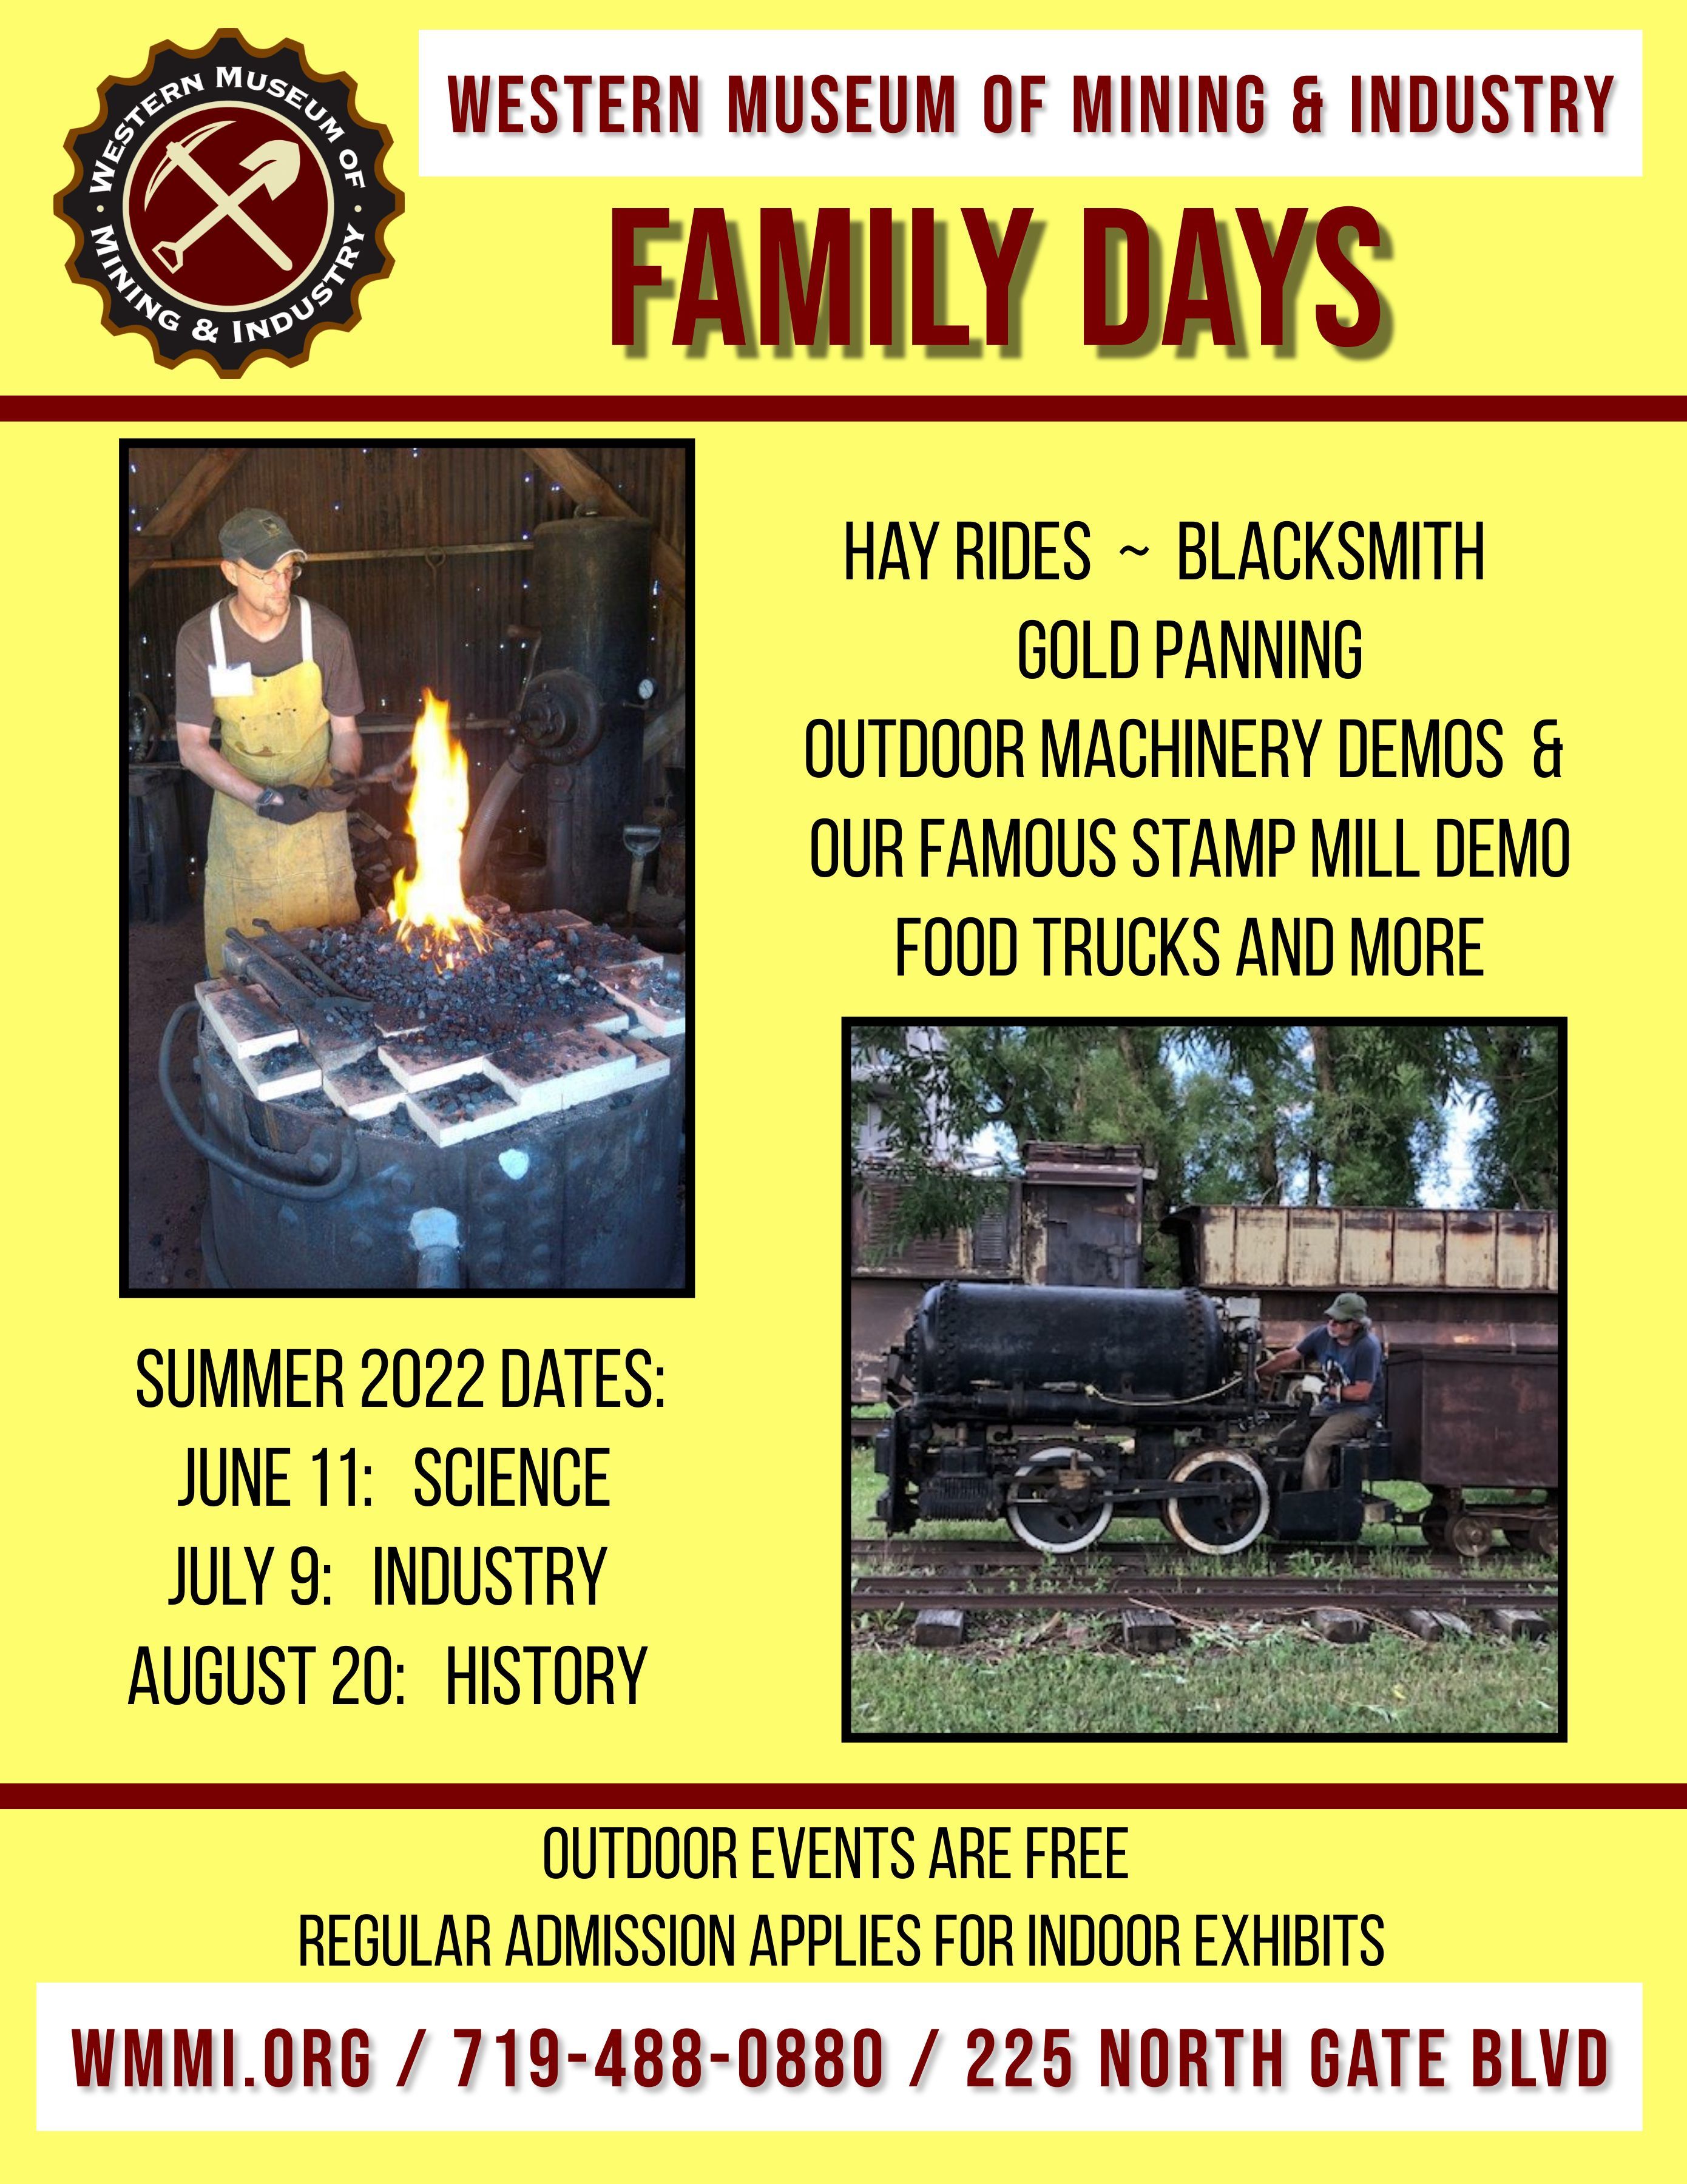 Family Days with Outdoor Machine Demonstrations including the famous Yellow Jacket Stamp Mill